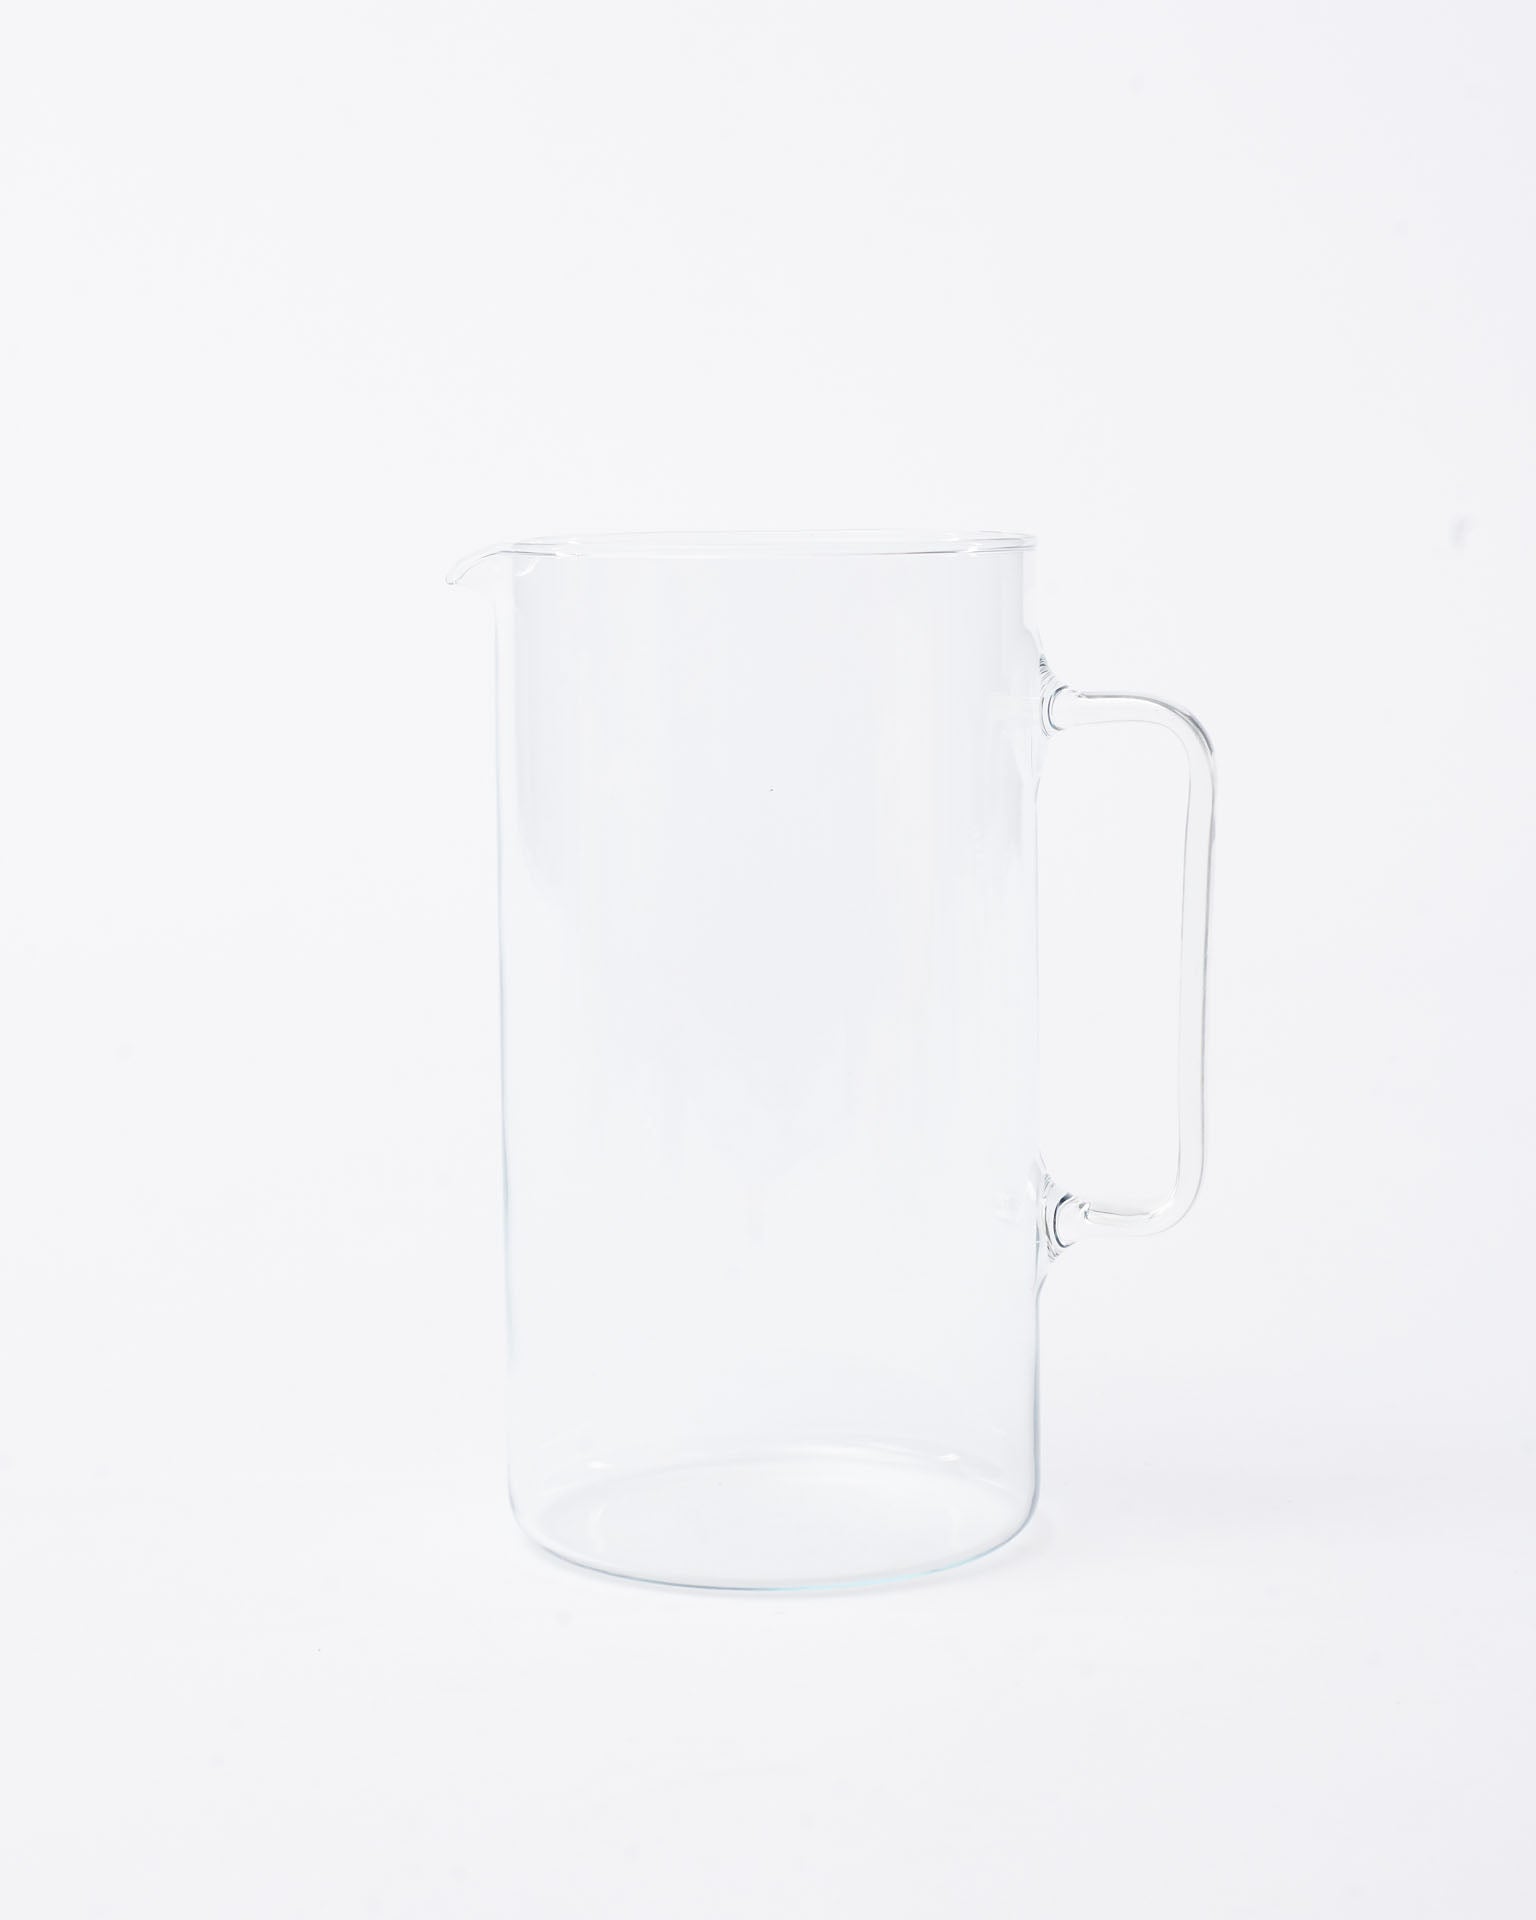 Glass pitcher one push design in white background in other view